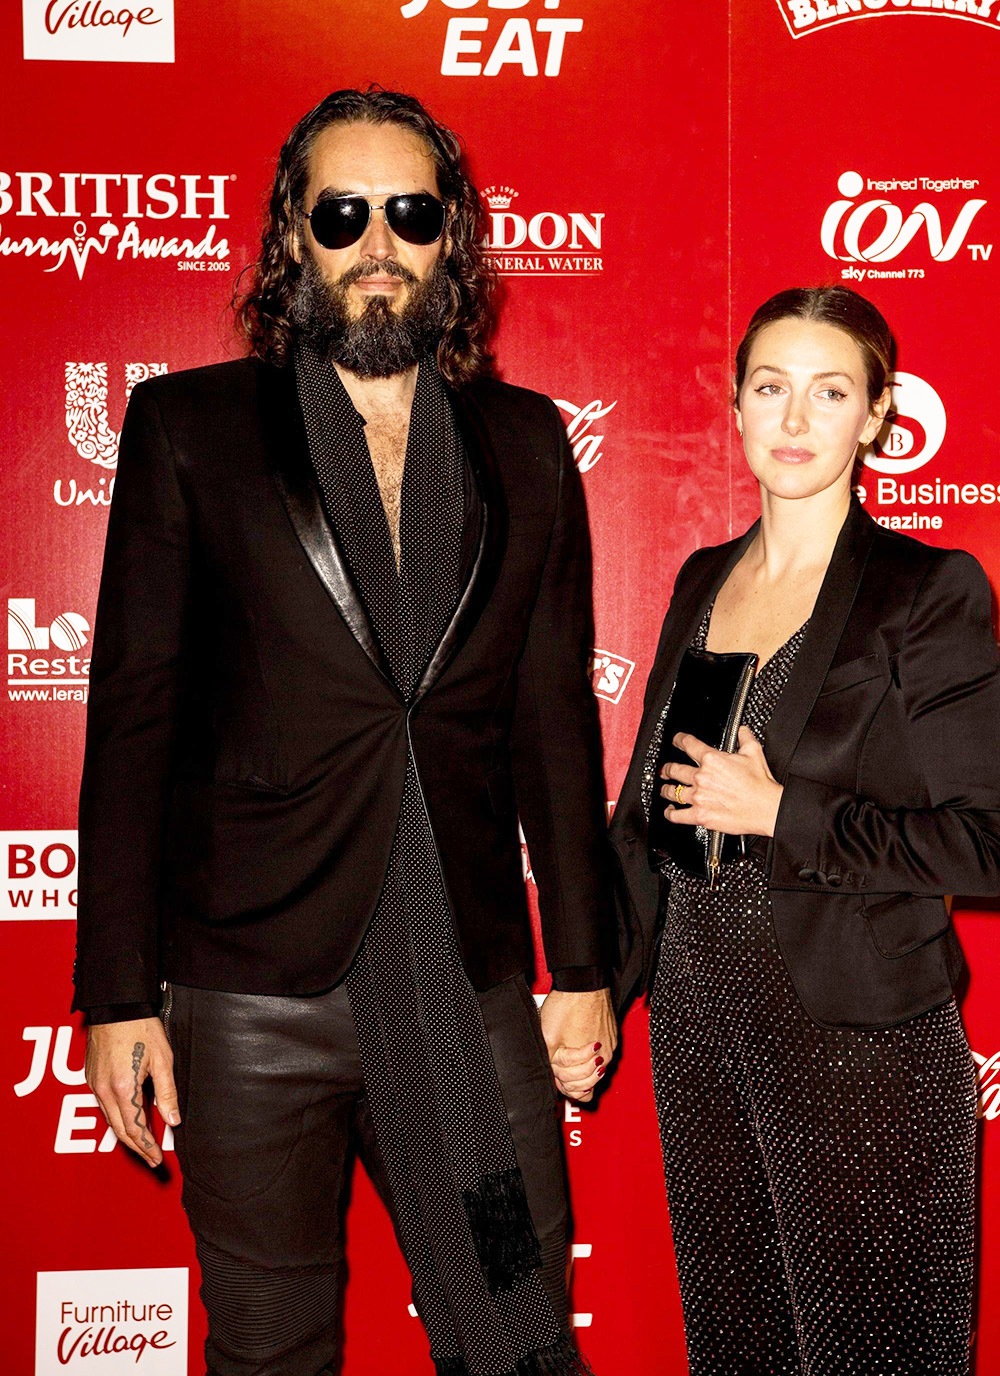 Russell Brand's wife Laura Brand: everything you need to know